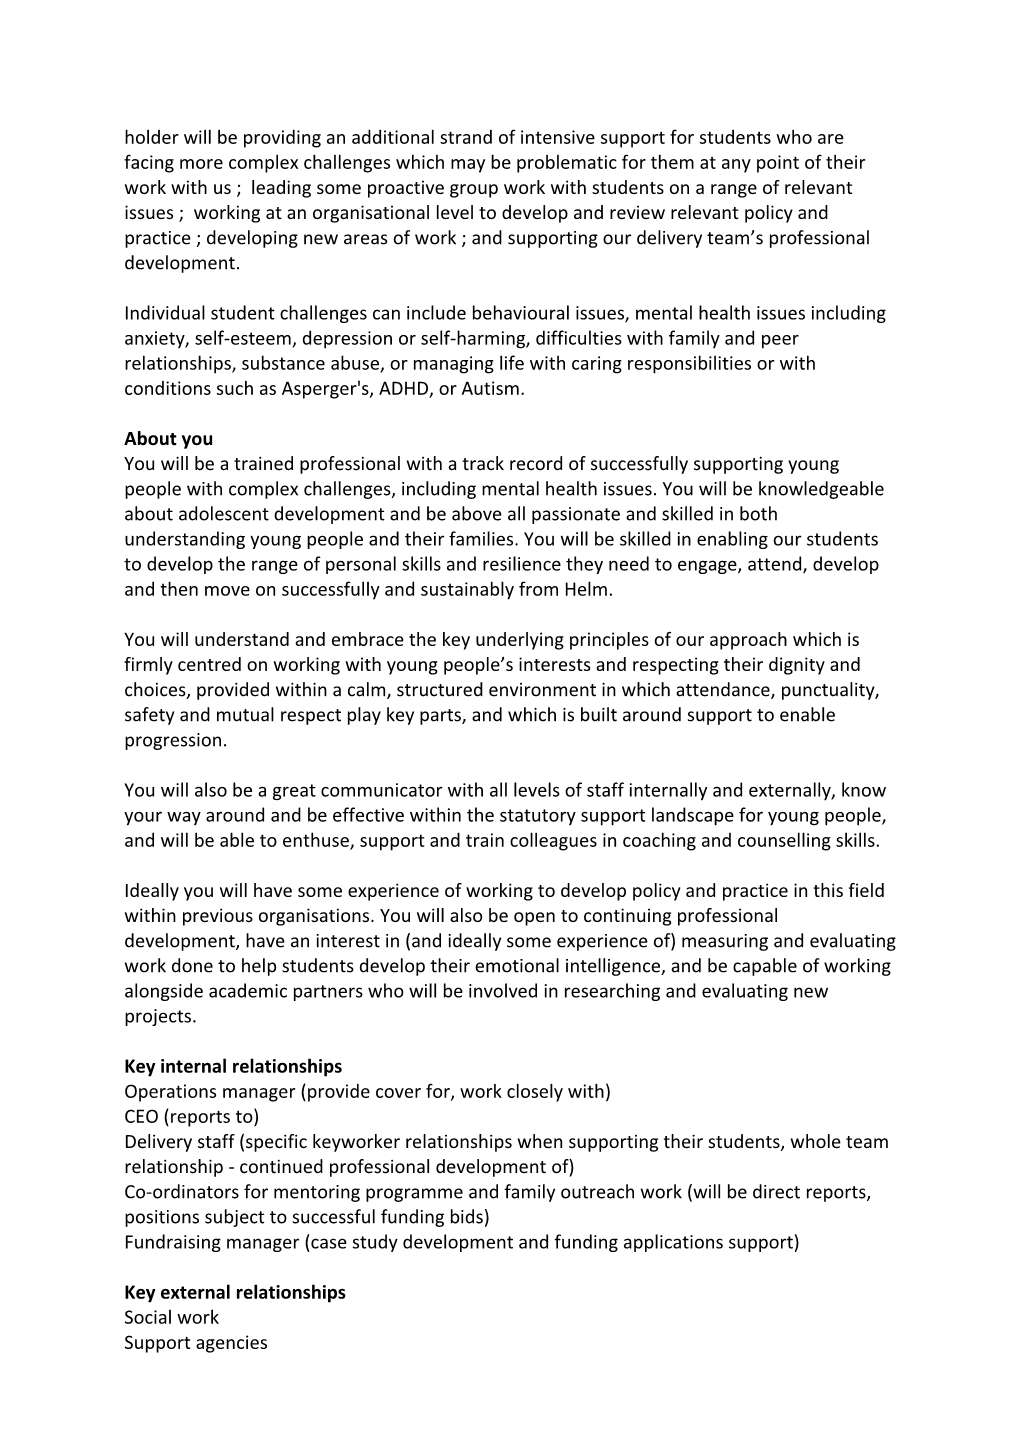 Manager (Student Wellbeing and Personal Development)